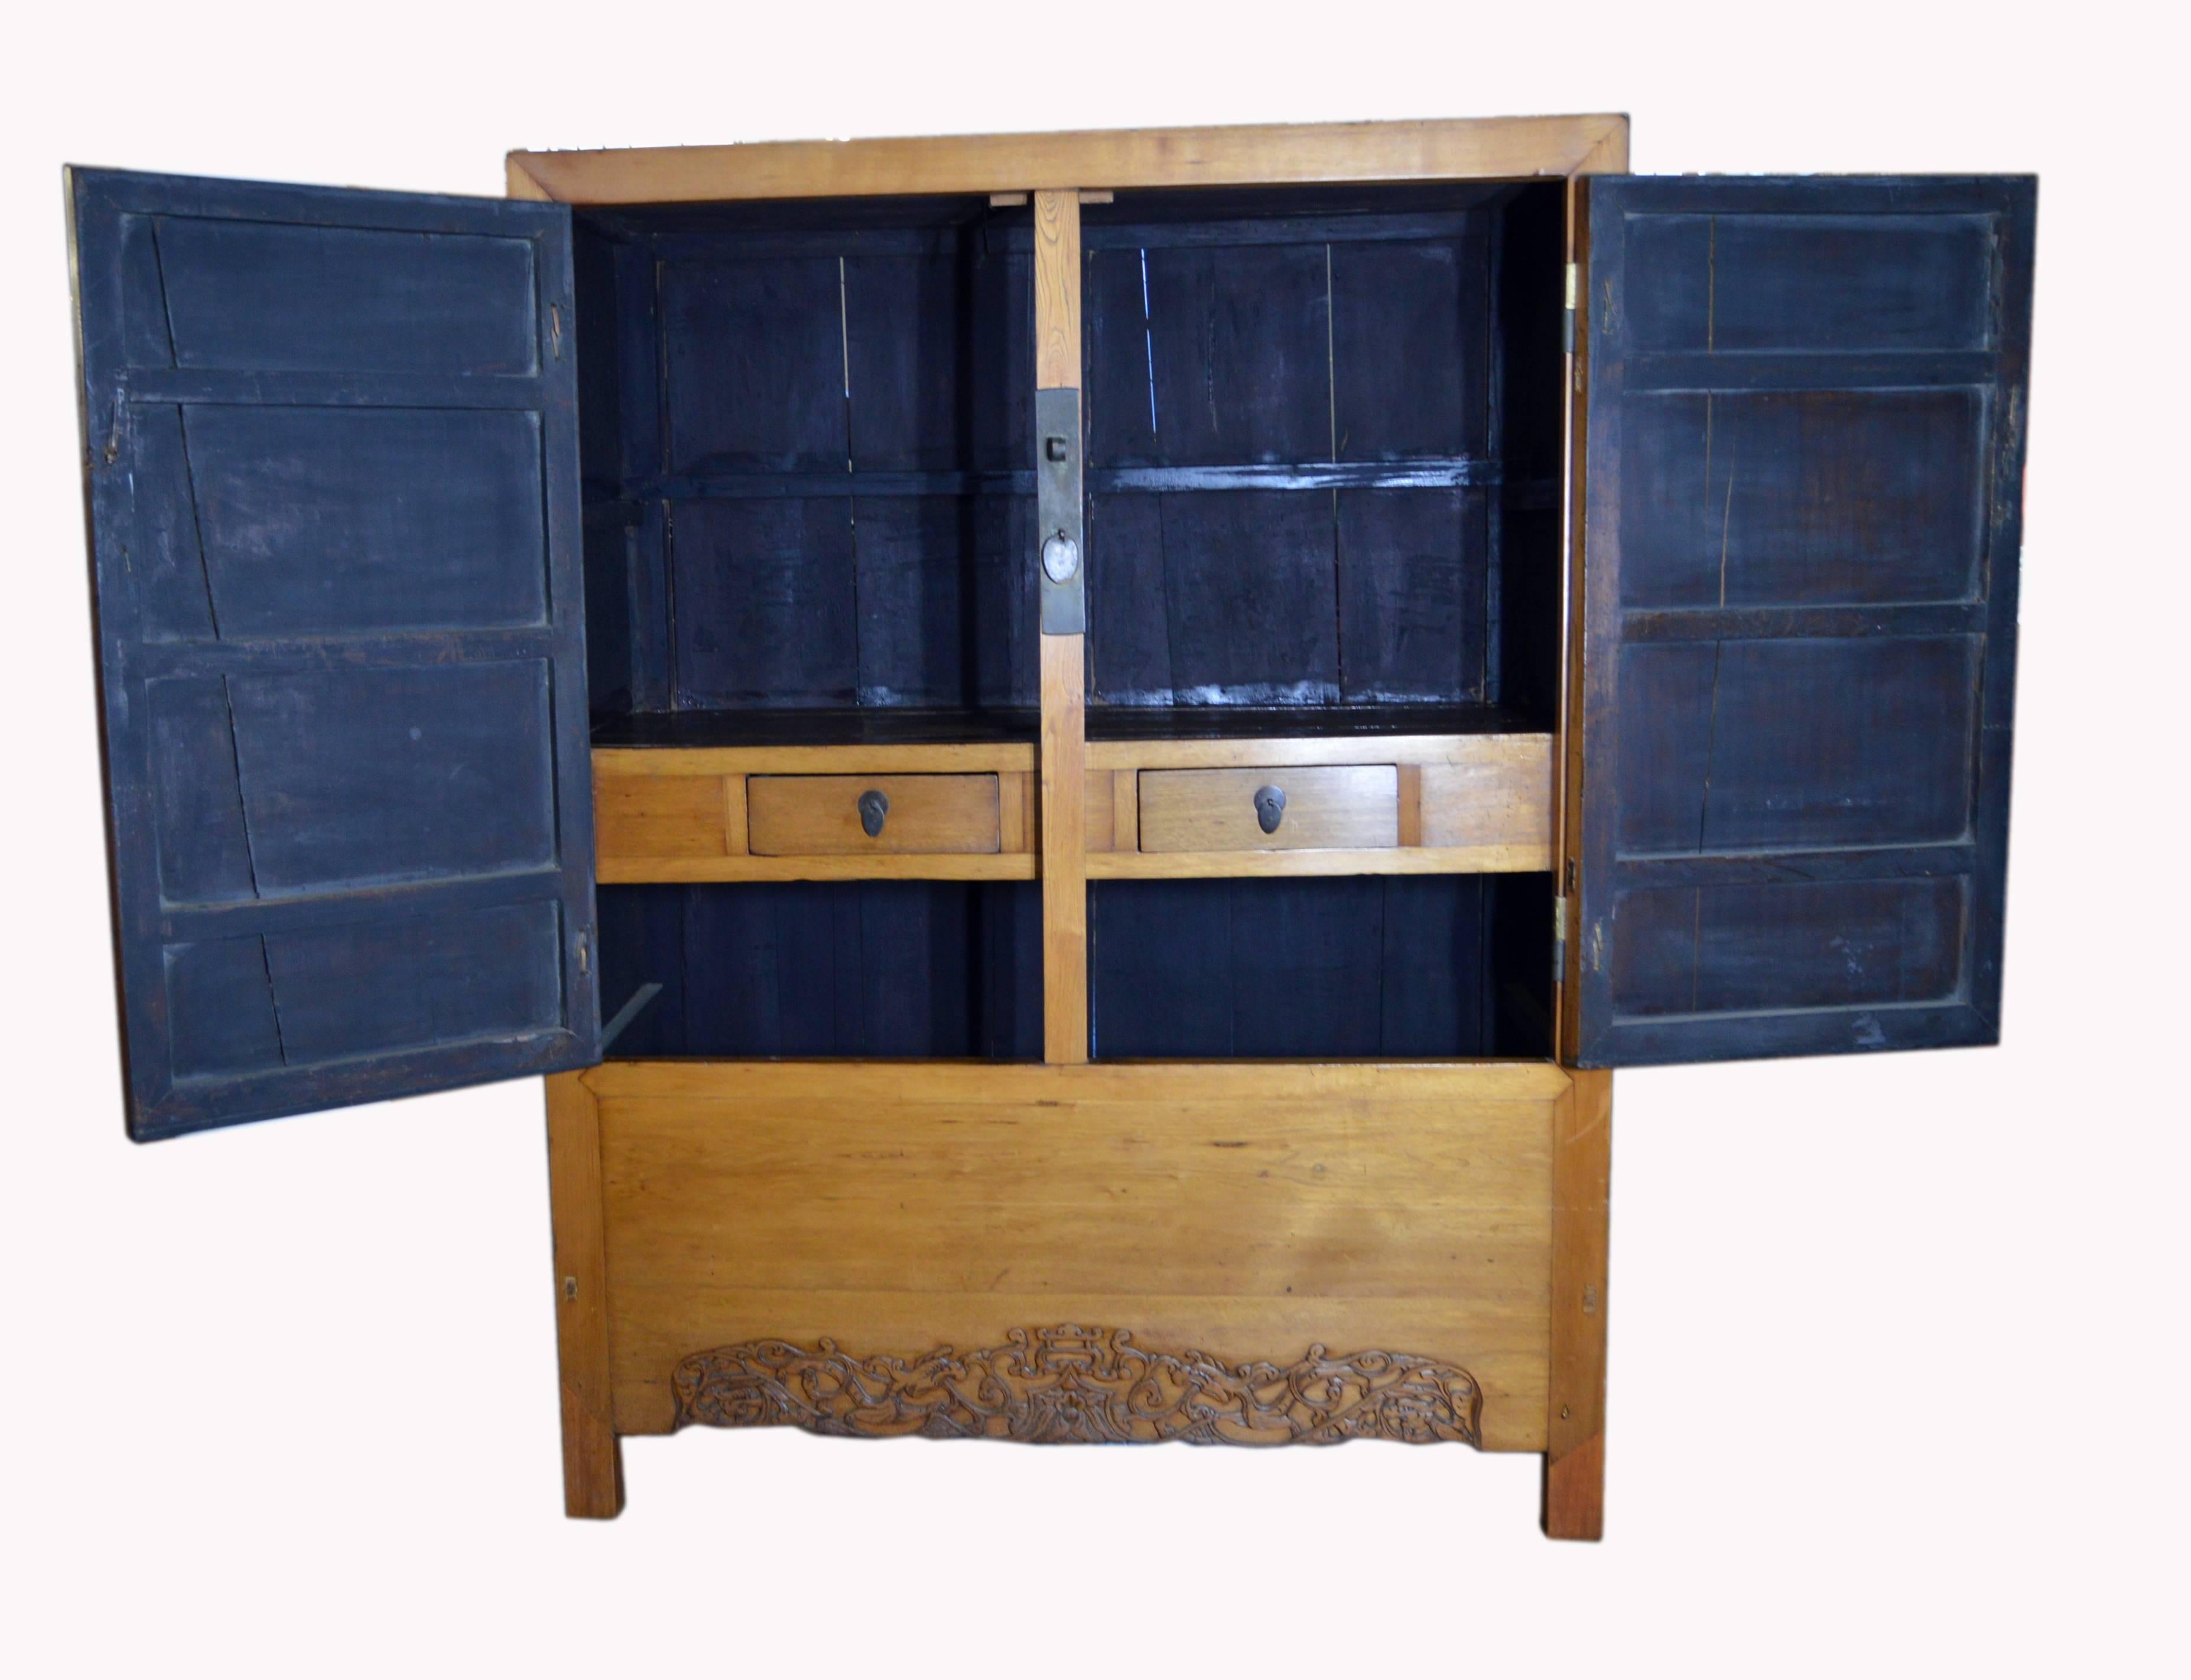 Carved Antique Chinese Lacquered Cabinet with Doors, Drawers and Brass Hardware For Sale